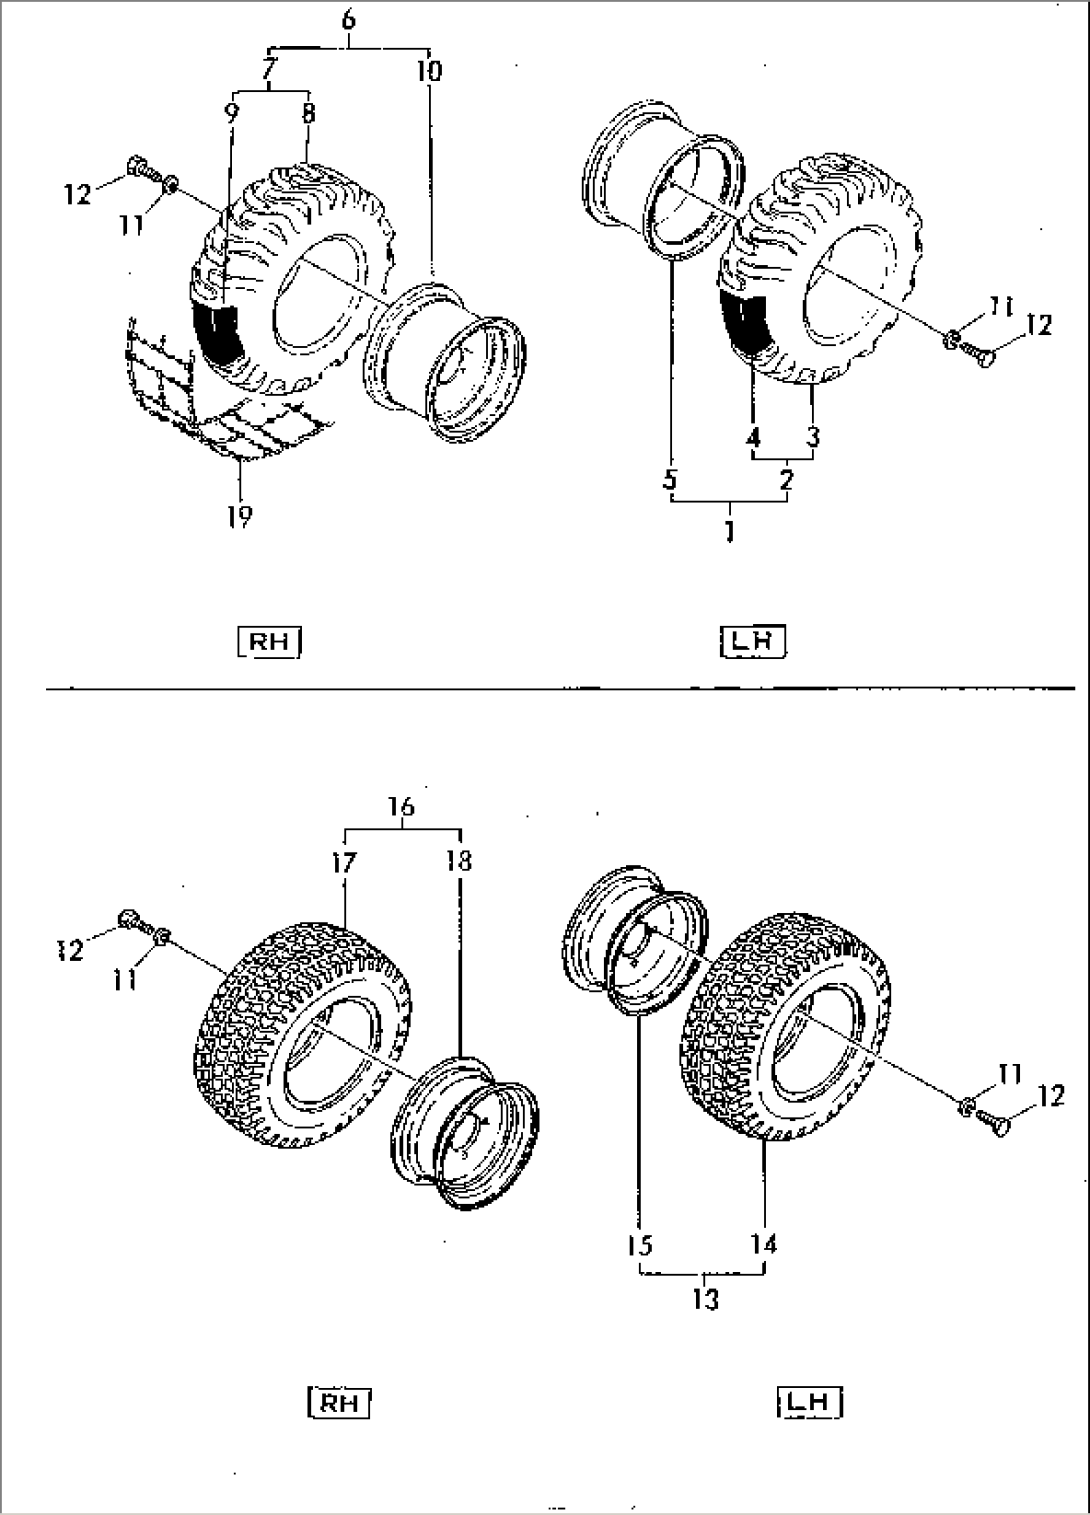 TIRE AND DISK WHEEL (5.5 - 15 ¤ 8.5 - 15)